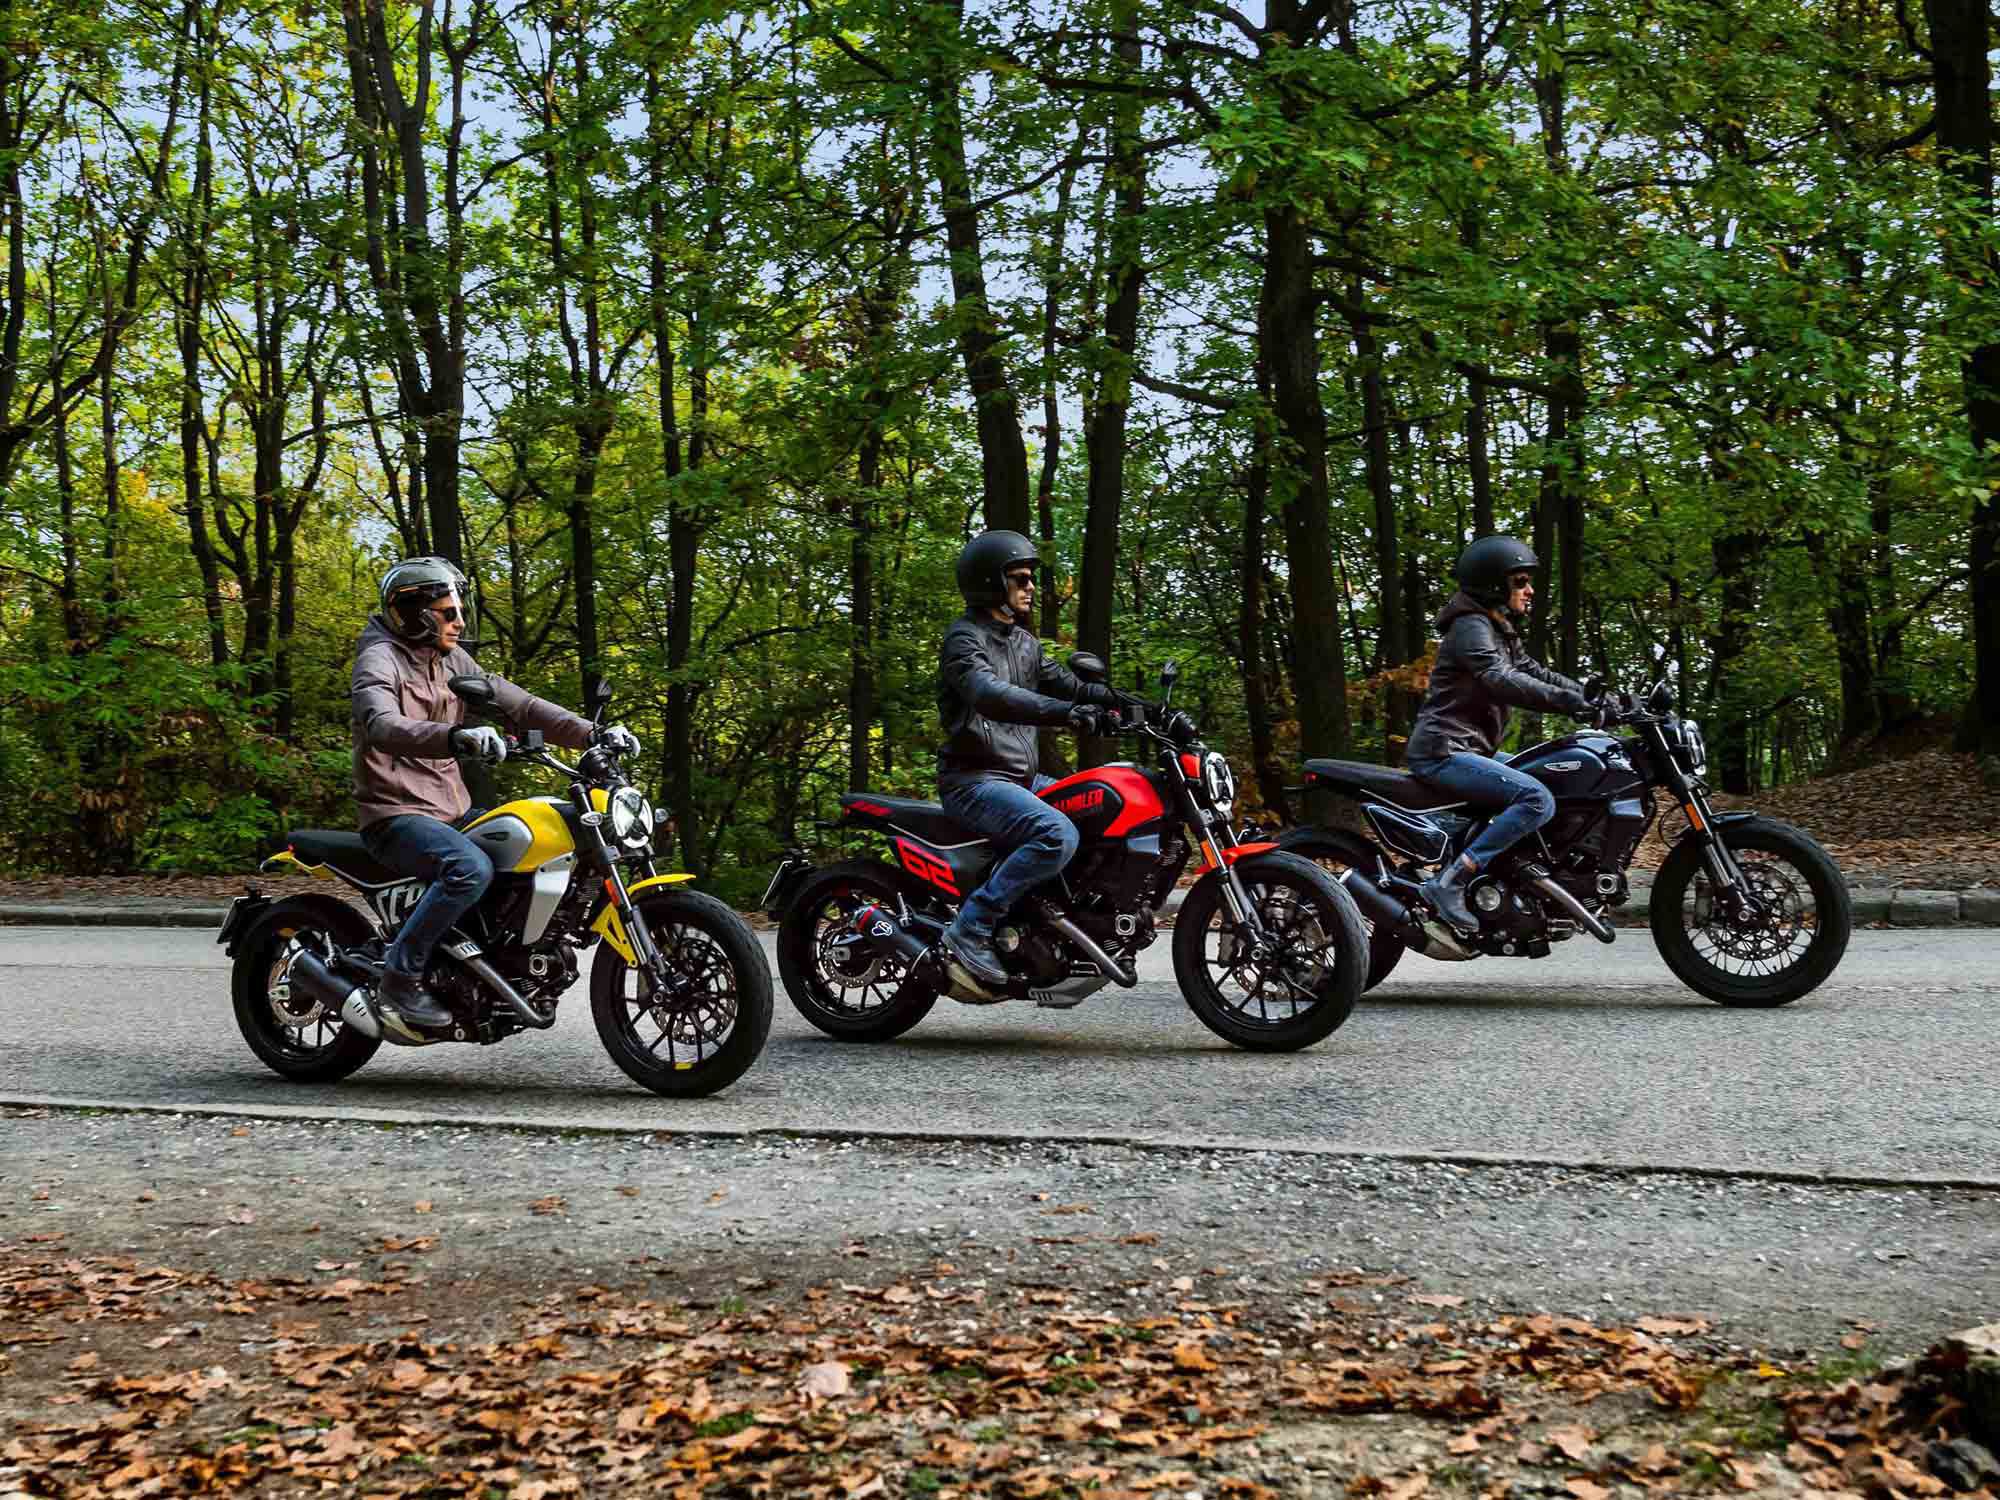 Ducati introduces a number of updates on its second-generation lineup of Scramblers.